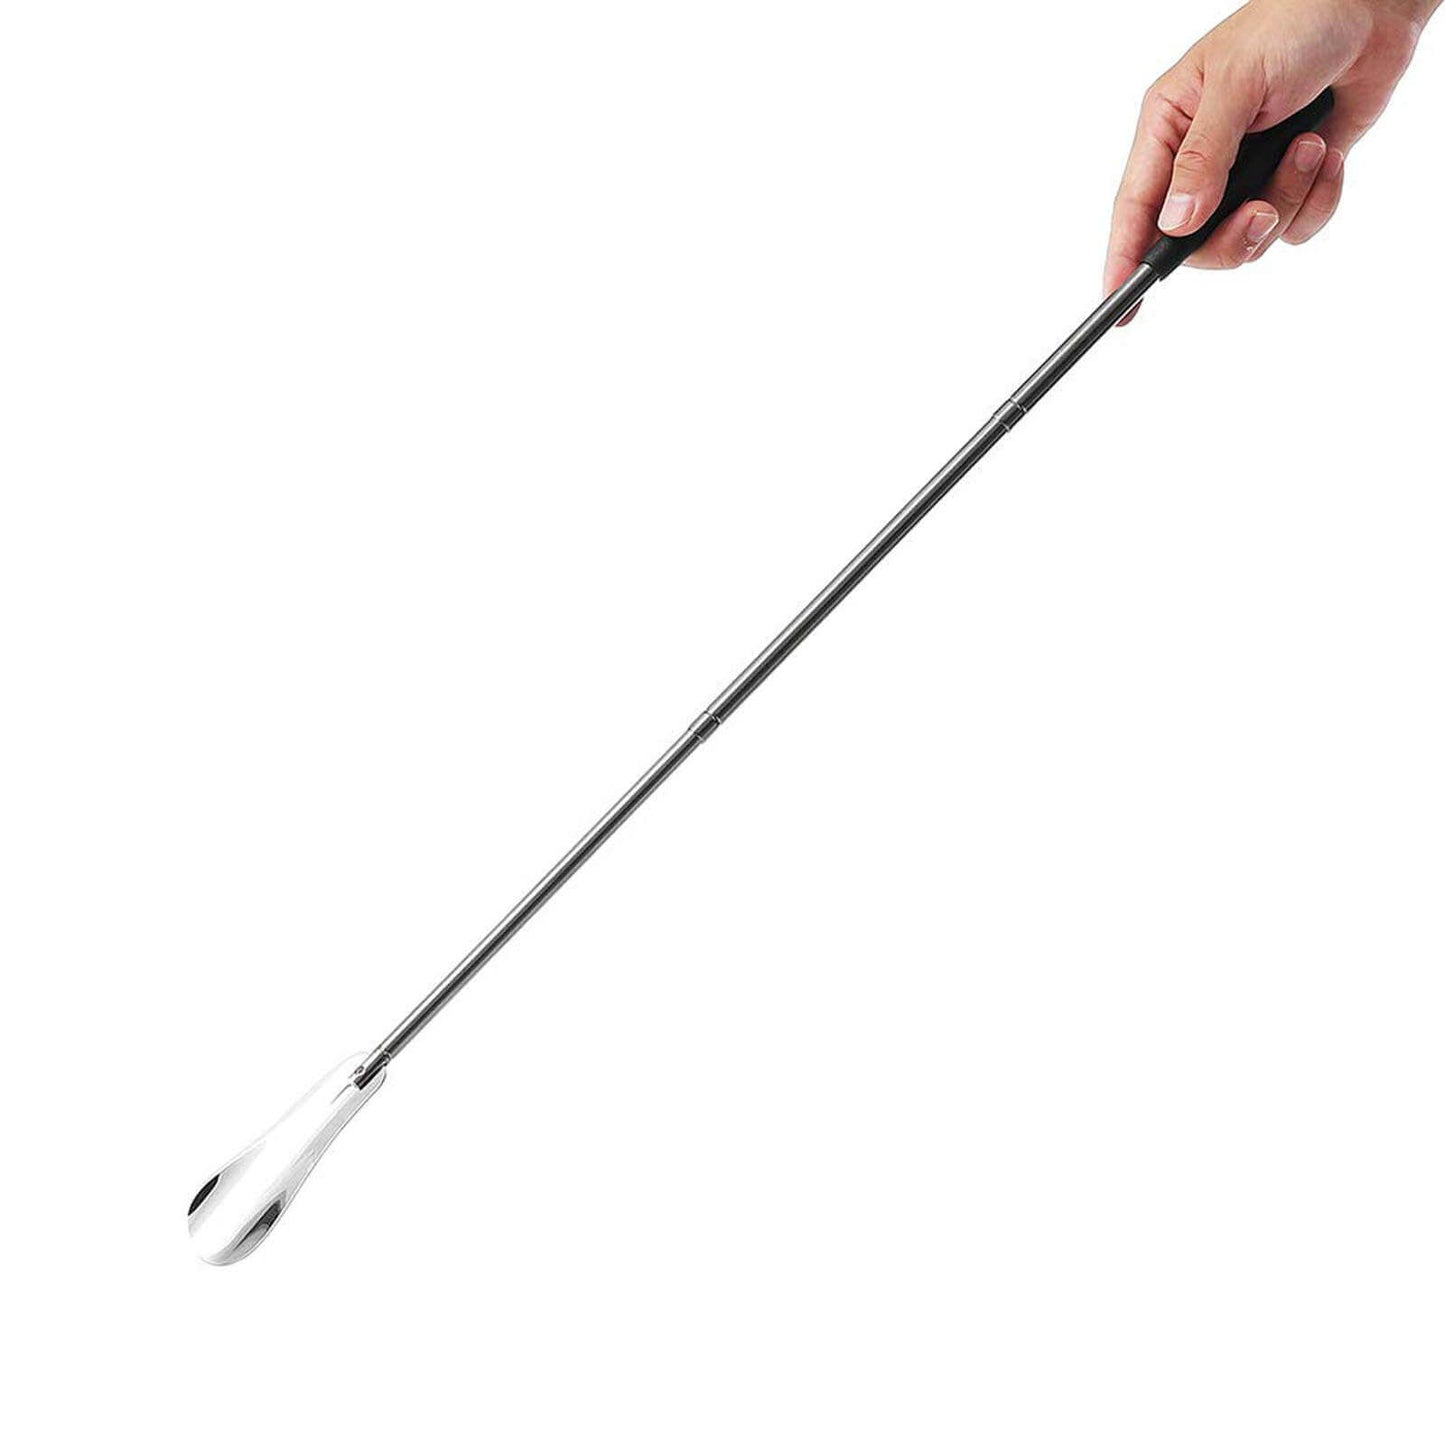 Telescopic Shoe Horn by Fanwer with Extendable Stainless Steel Handle, gripped by a hand